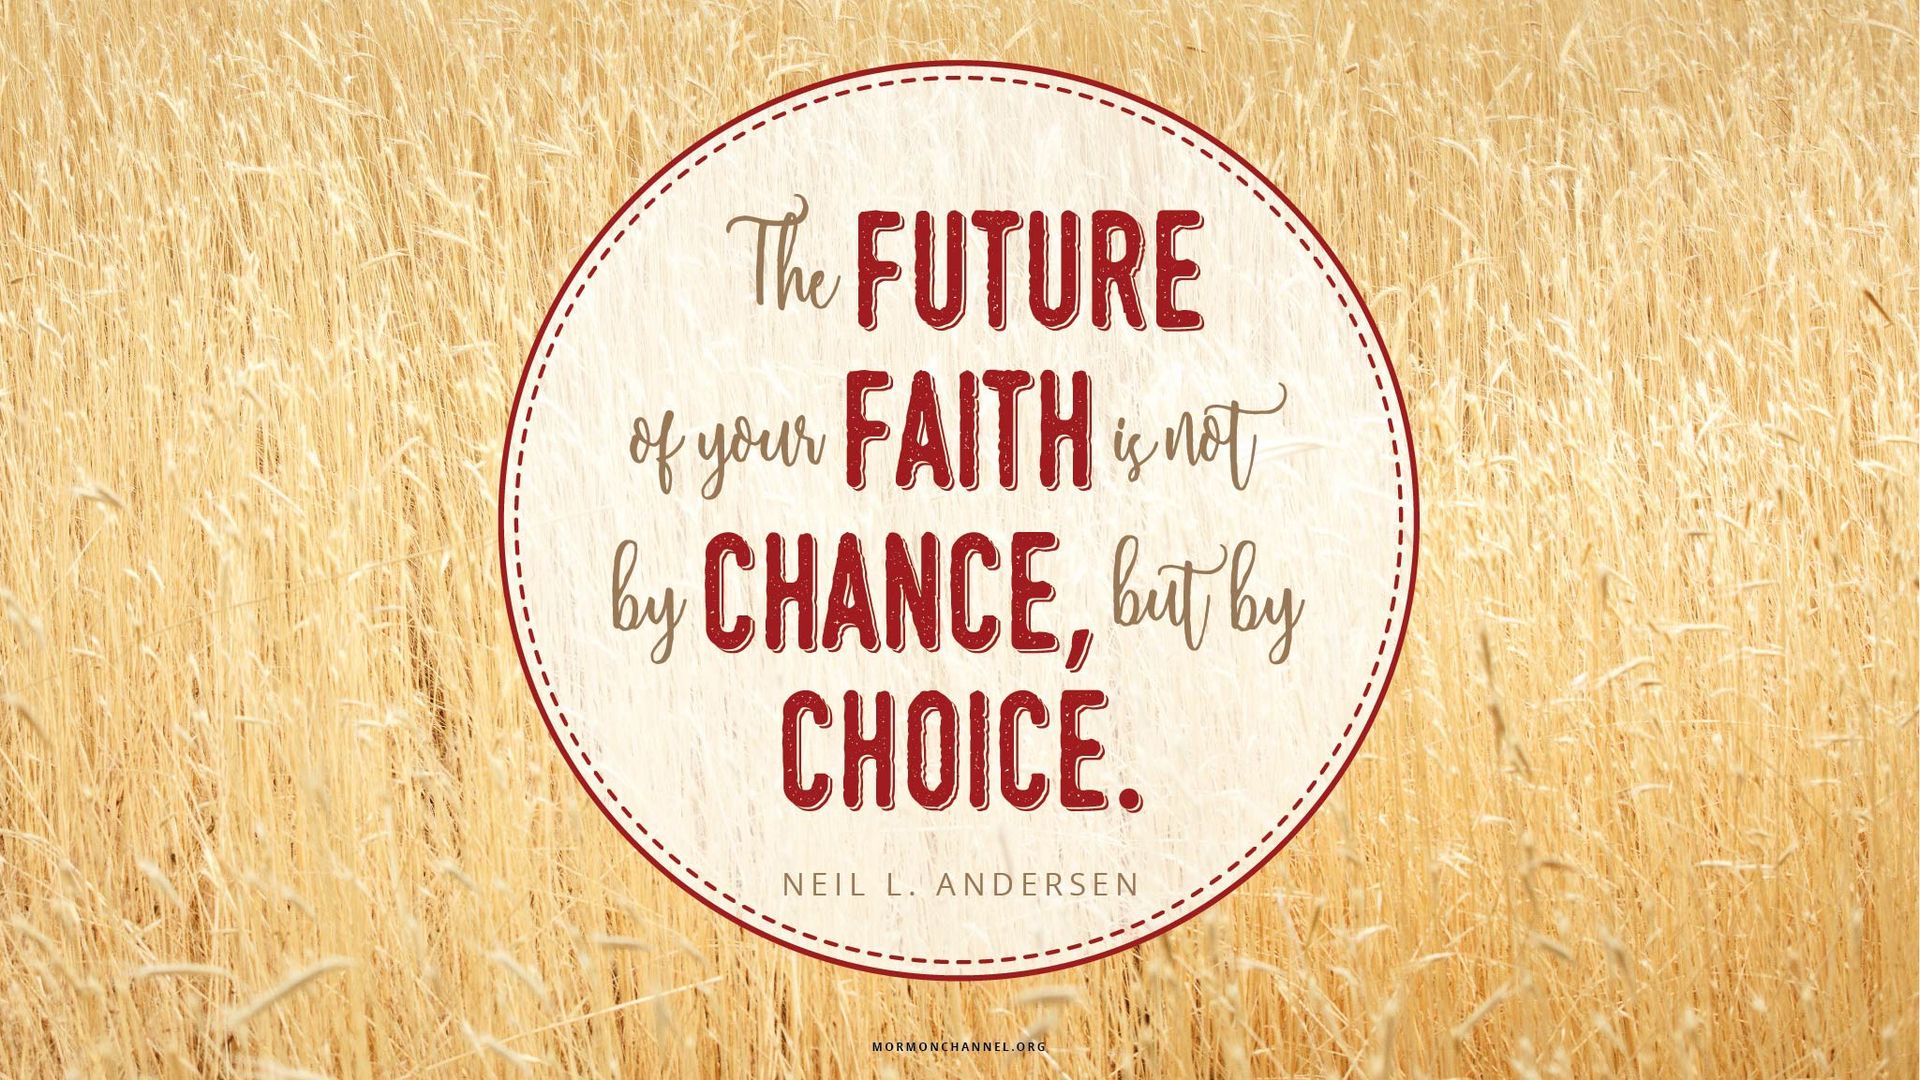 “The future of your faith is not by chance, but by choice.”—Elder Neil L. Andersen, “Faith Is Not by Chance, but by Choice”